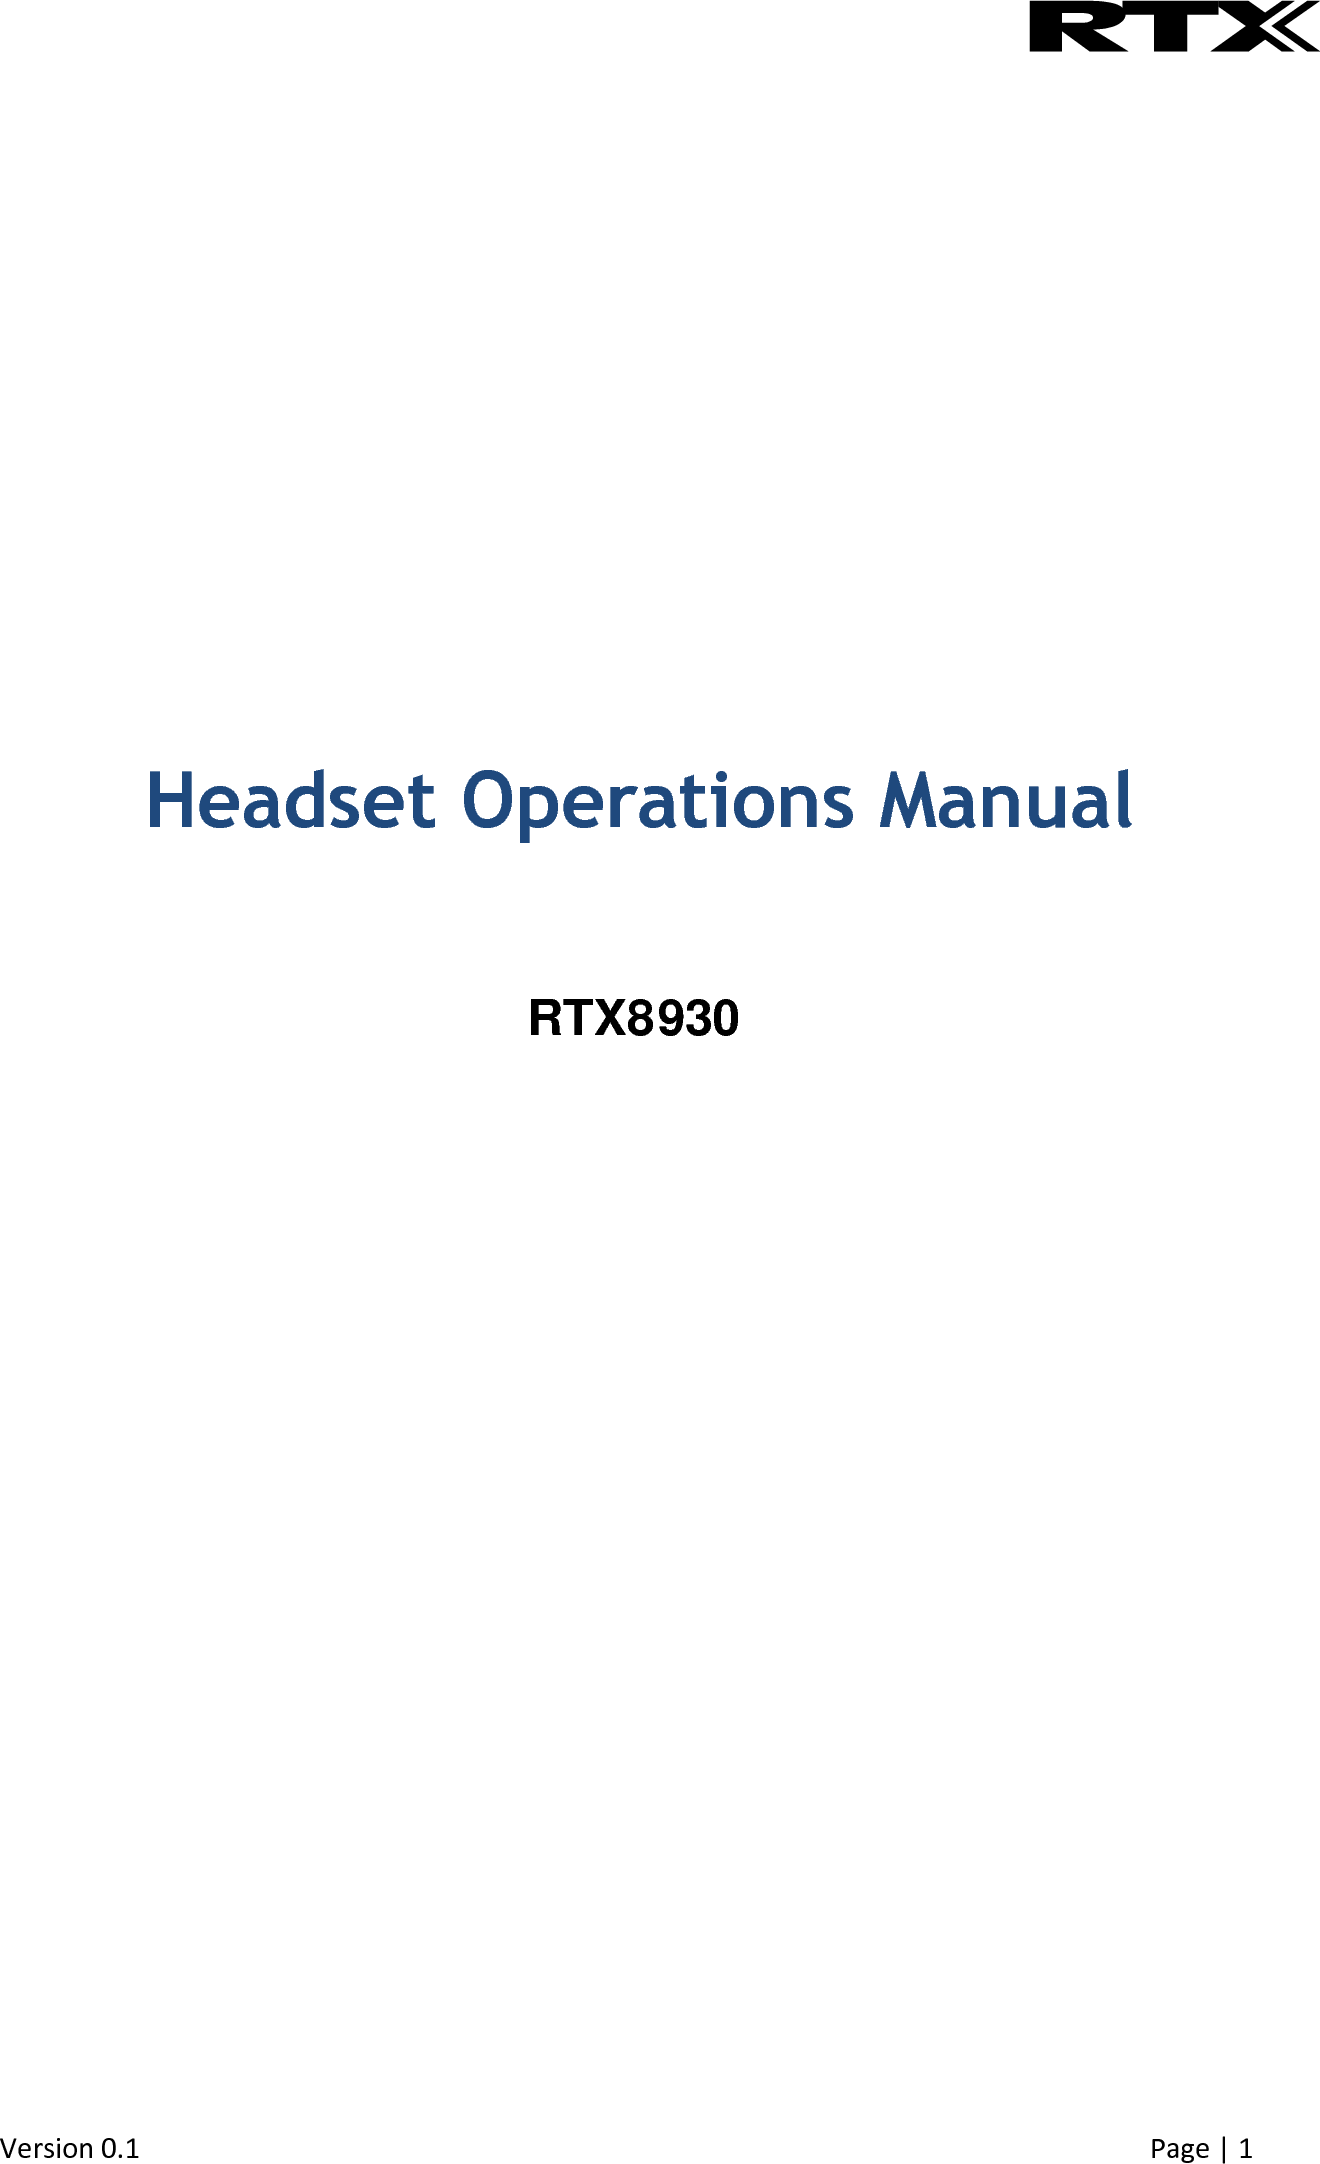  Version 0.1     Page | 1          Headset Operations Manual  RTX8930             